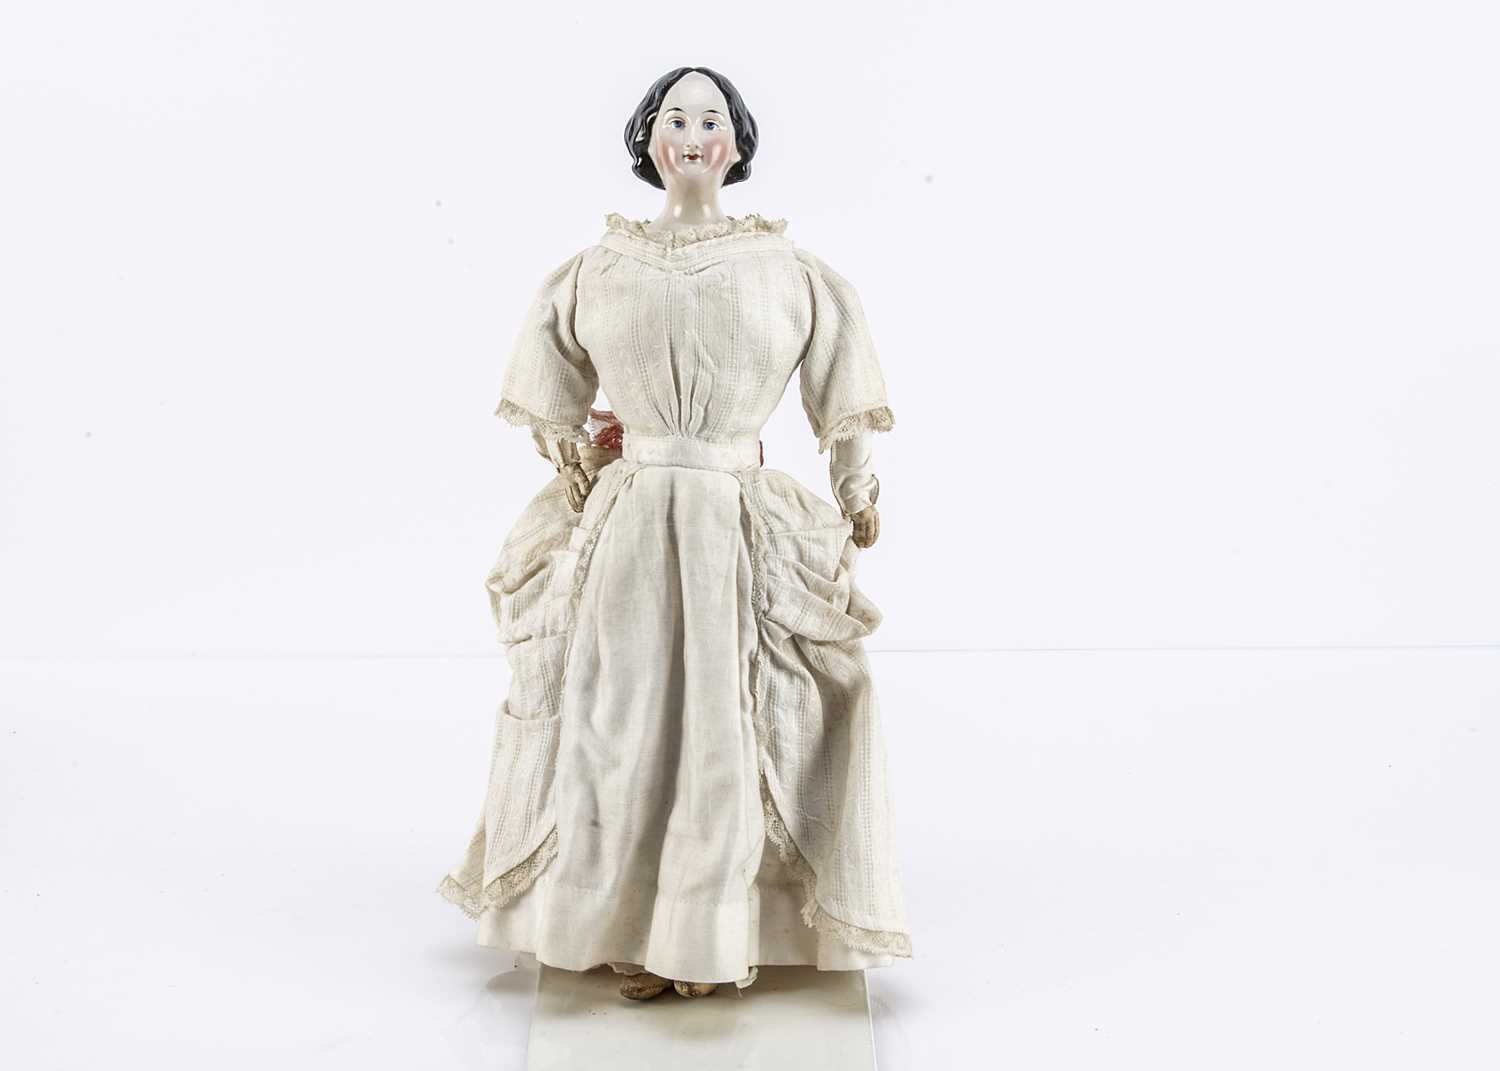 A fine German mid 19th century china shoulder-head doll with elaborate hair,